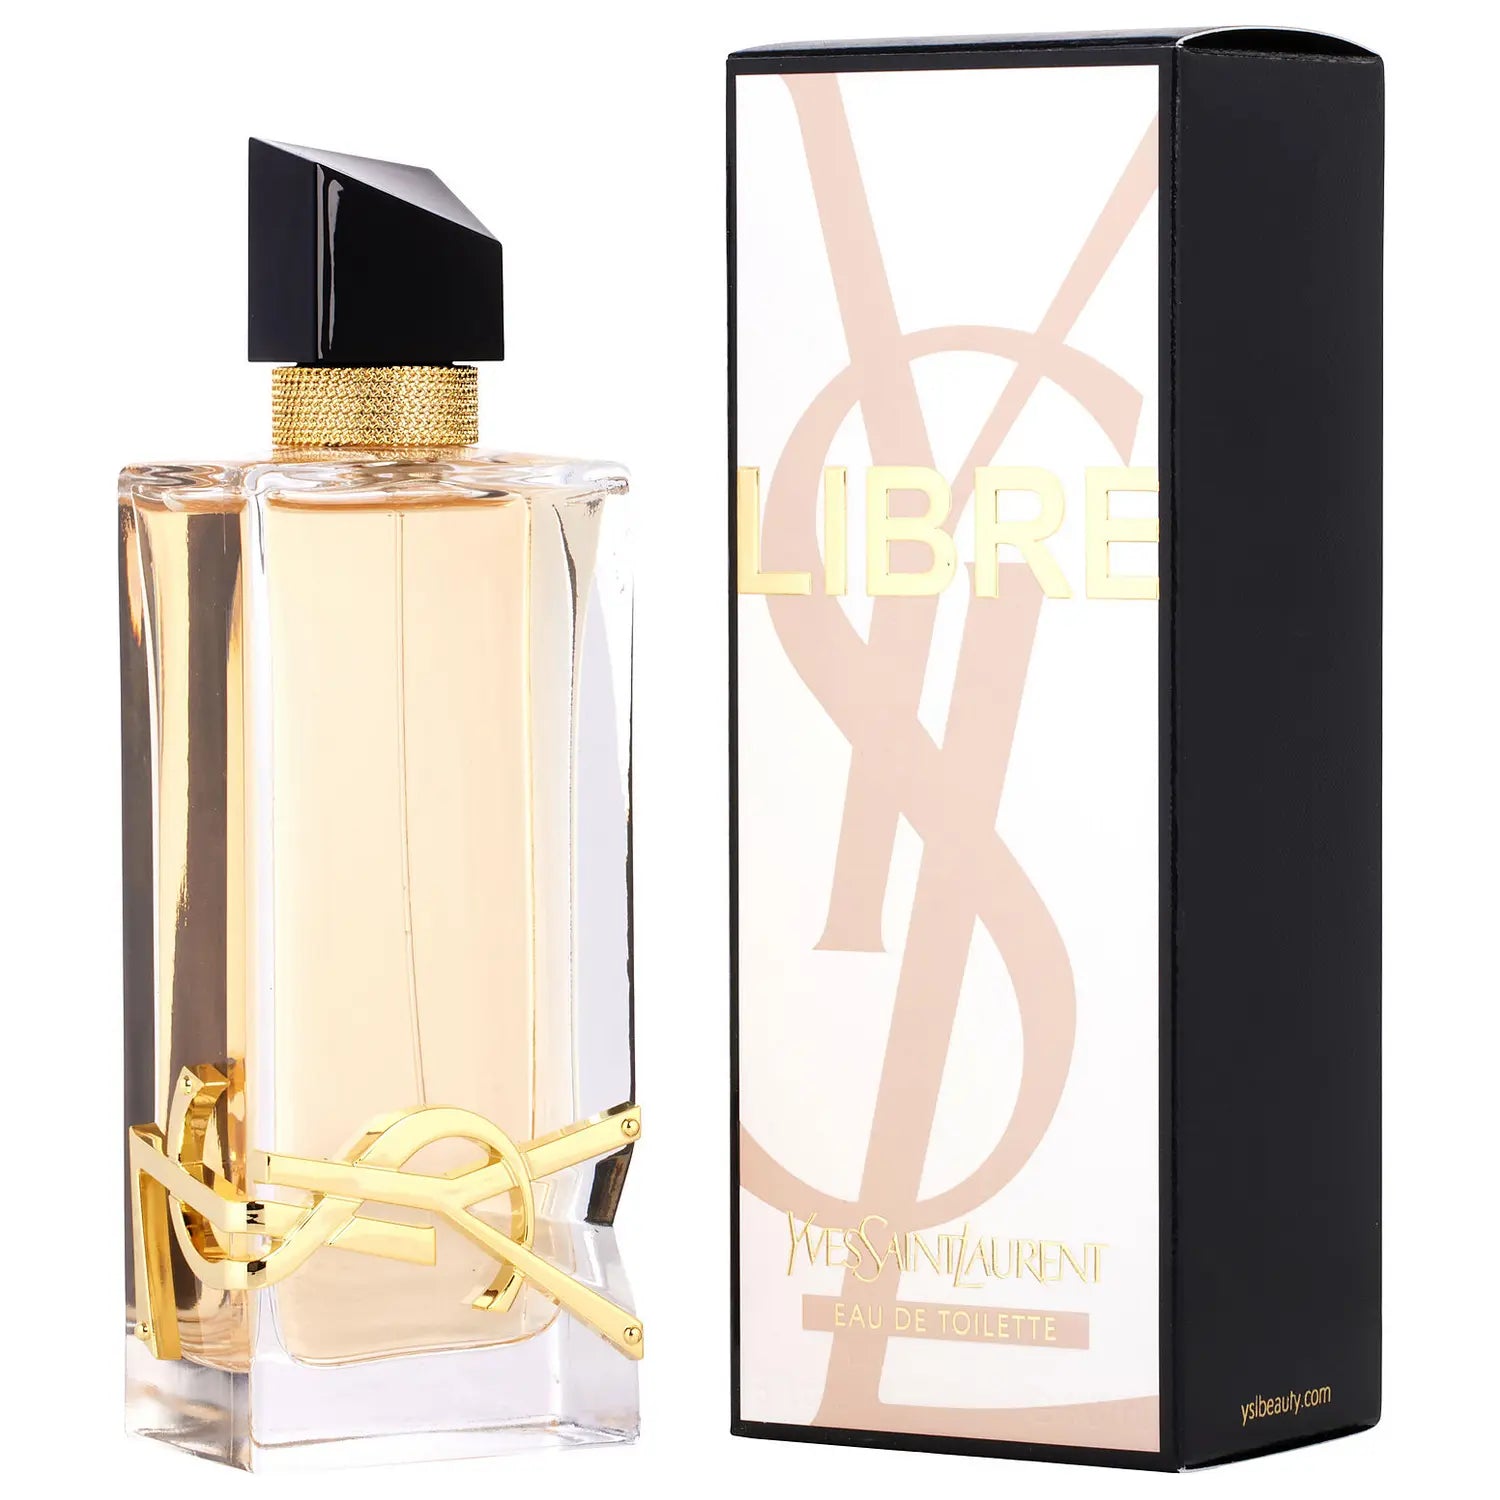 Libre by YSL 3.0 oz EDT Spray for Women